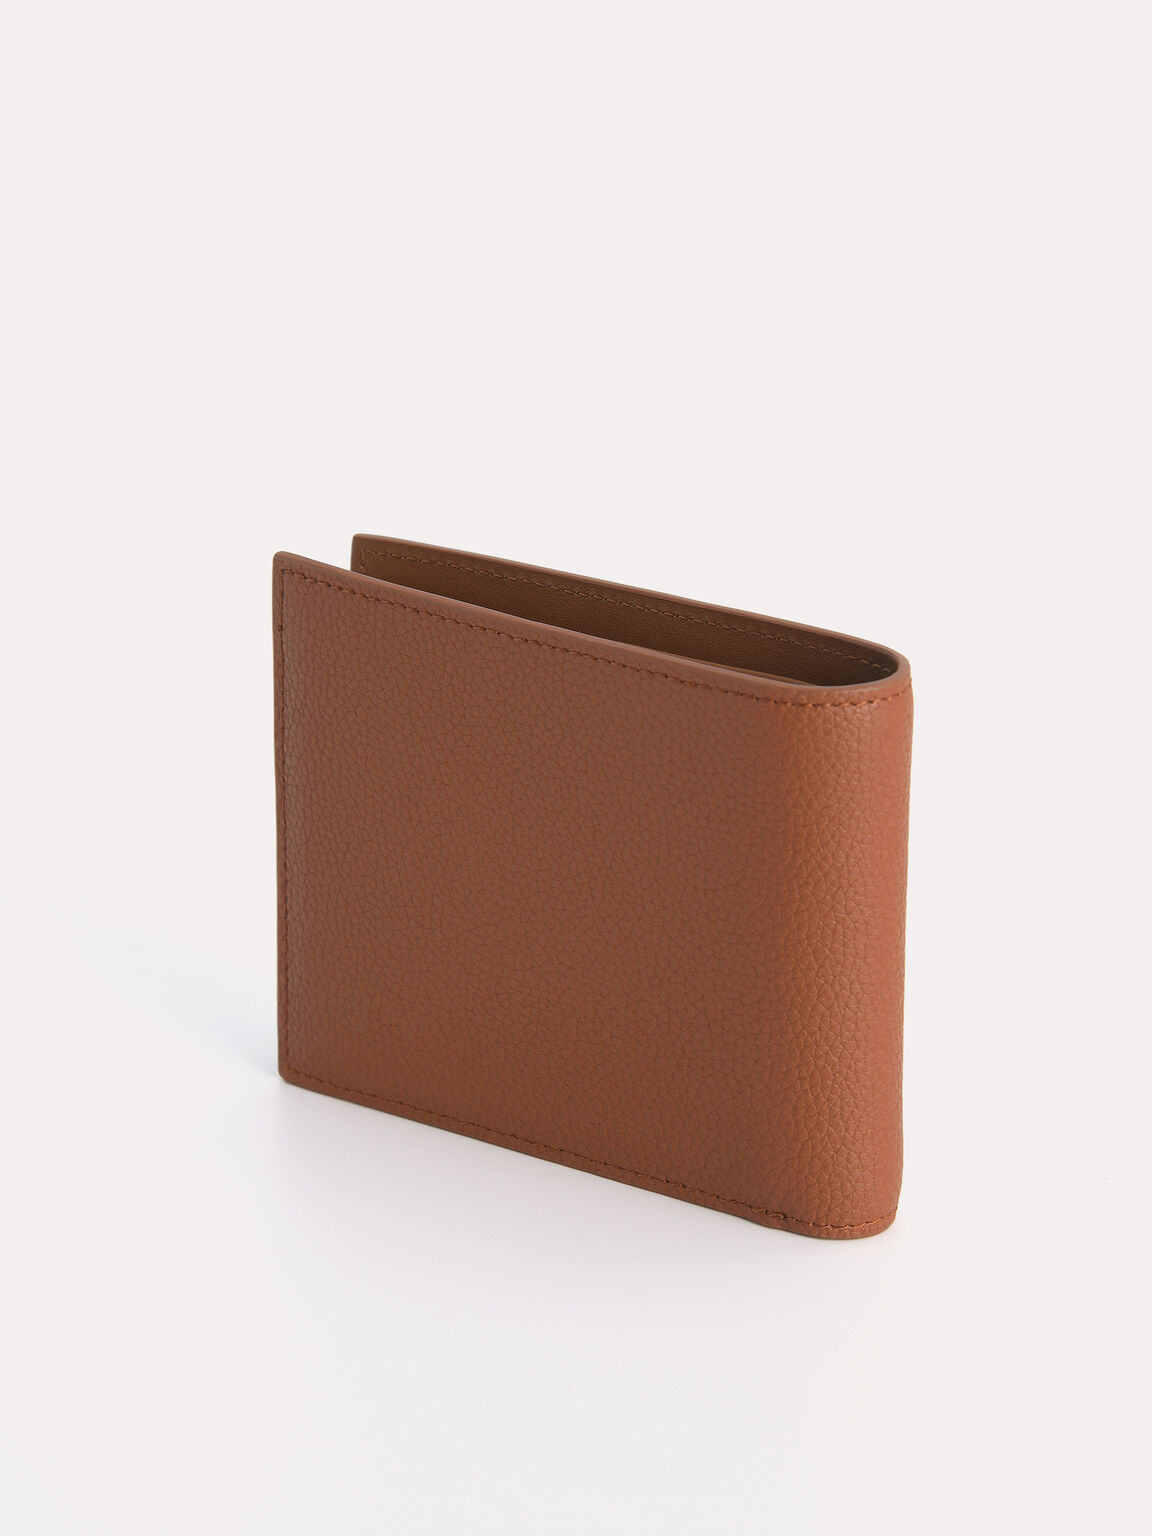 Textured Leather Bi-Fold Wallet with Insert, Cognac, hi-res